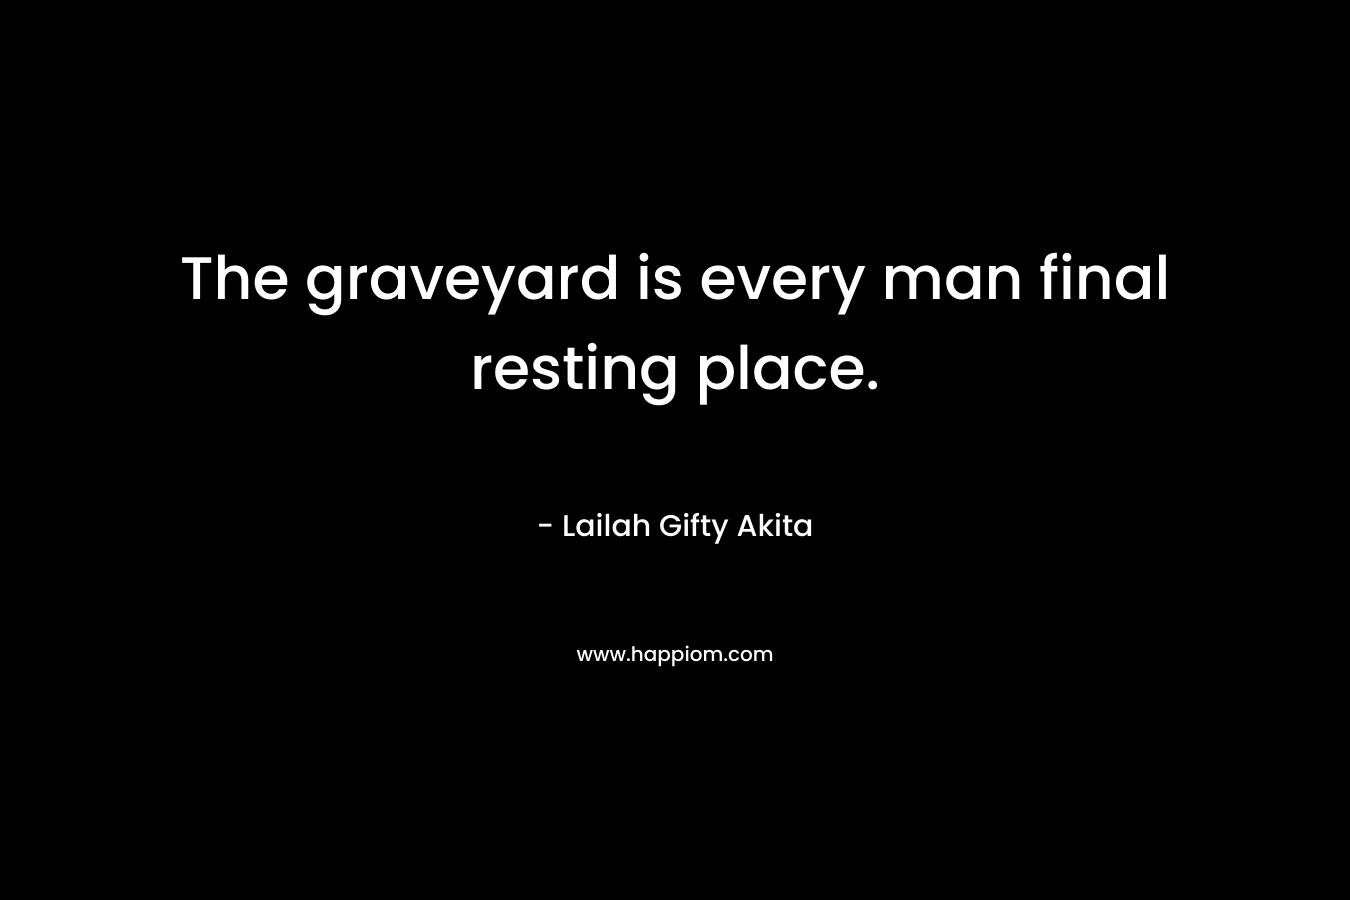 The graveyard is every man final resting place. – Lailah Gifty Akita